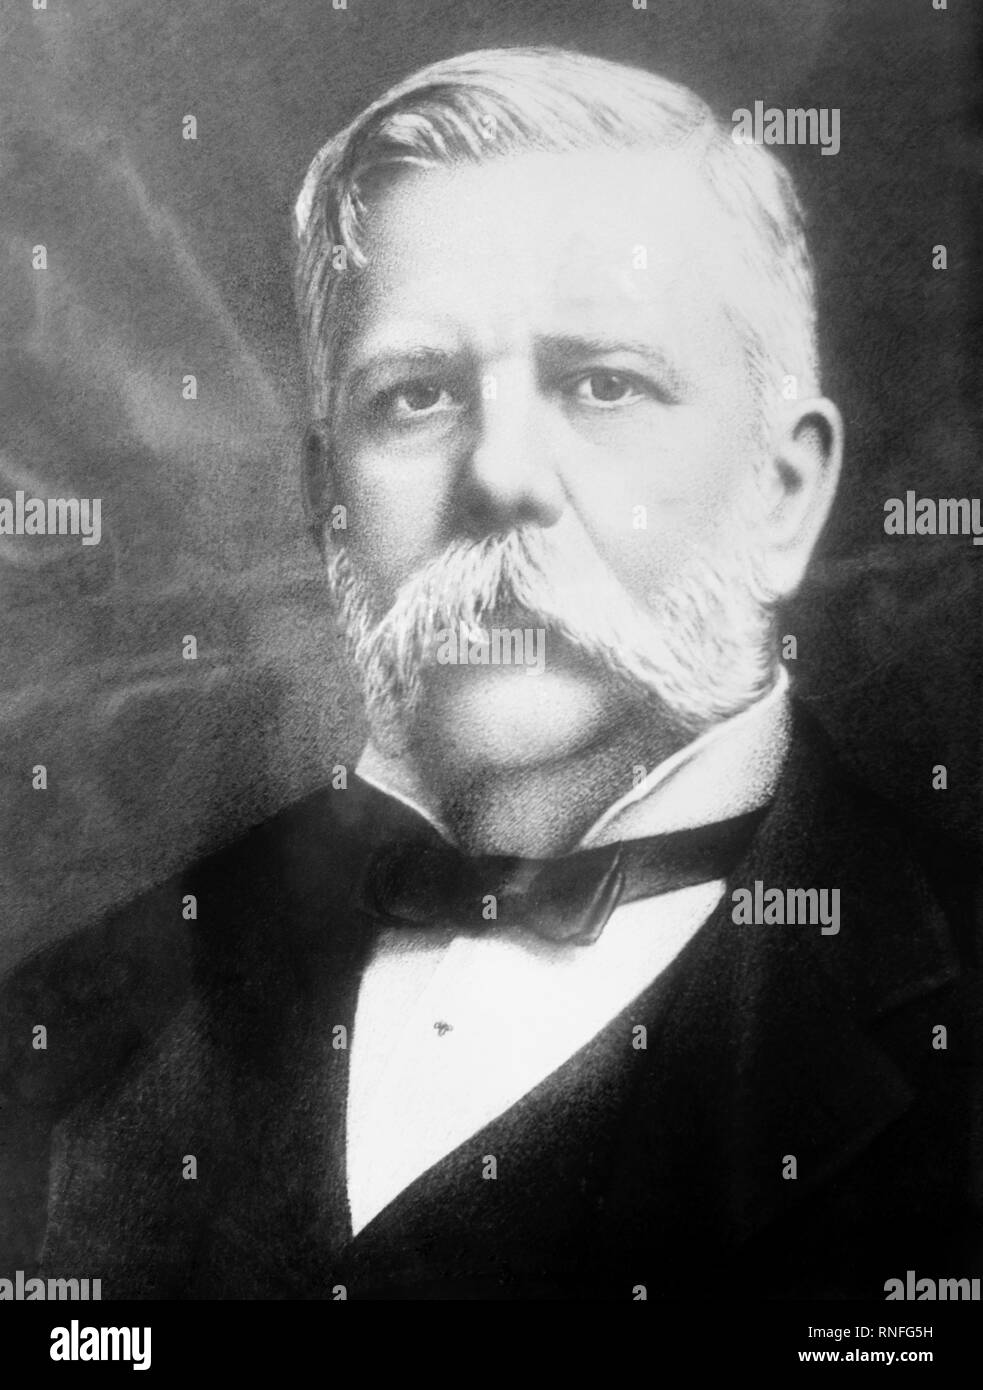 George westinghouse american engineer Black and White Stock Photos ...